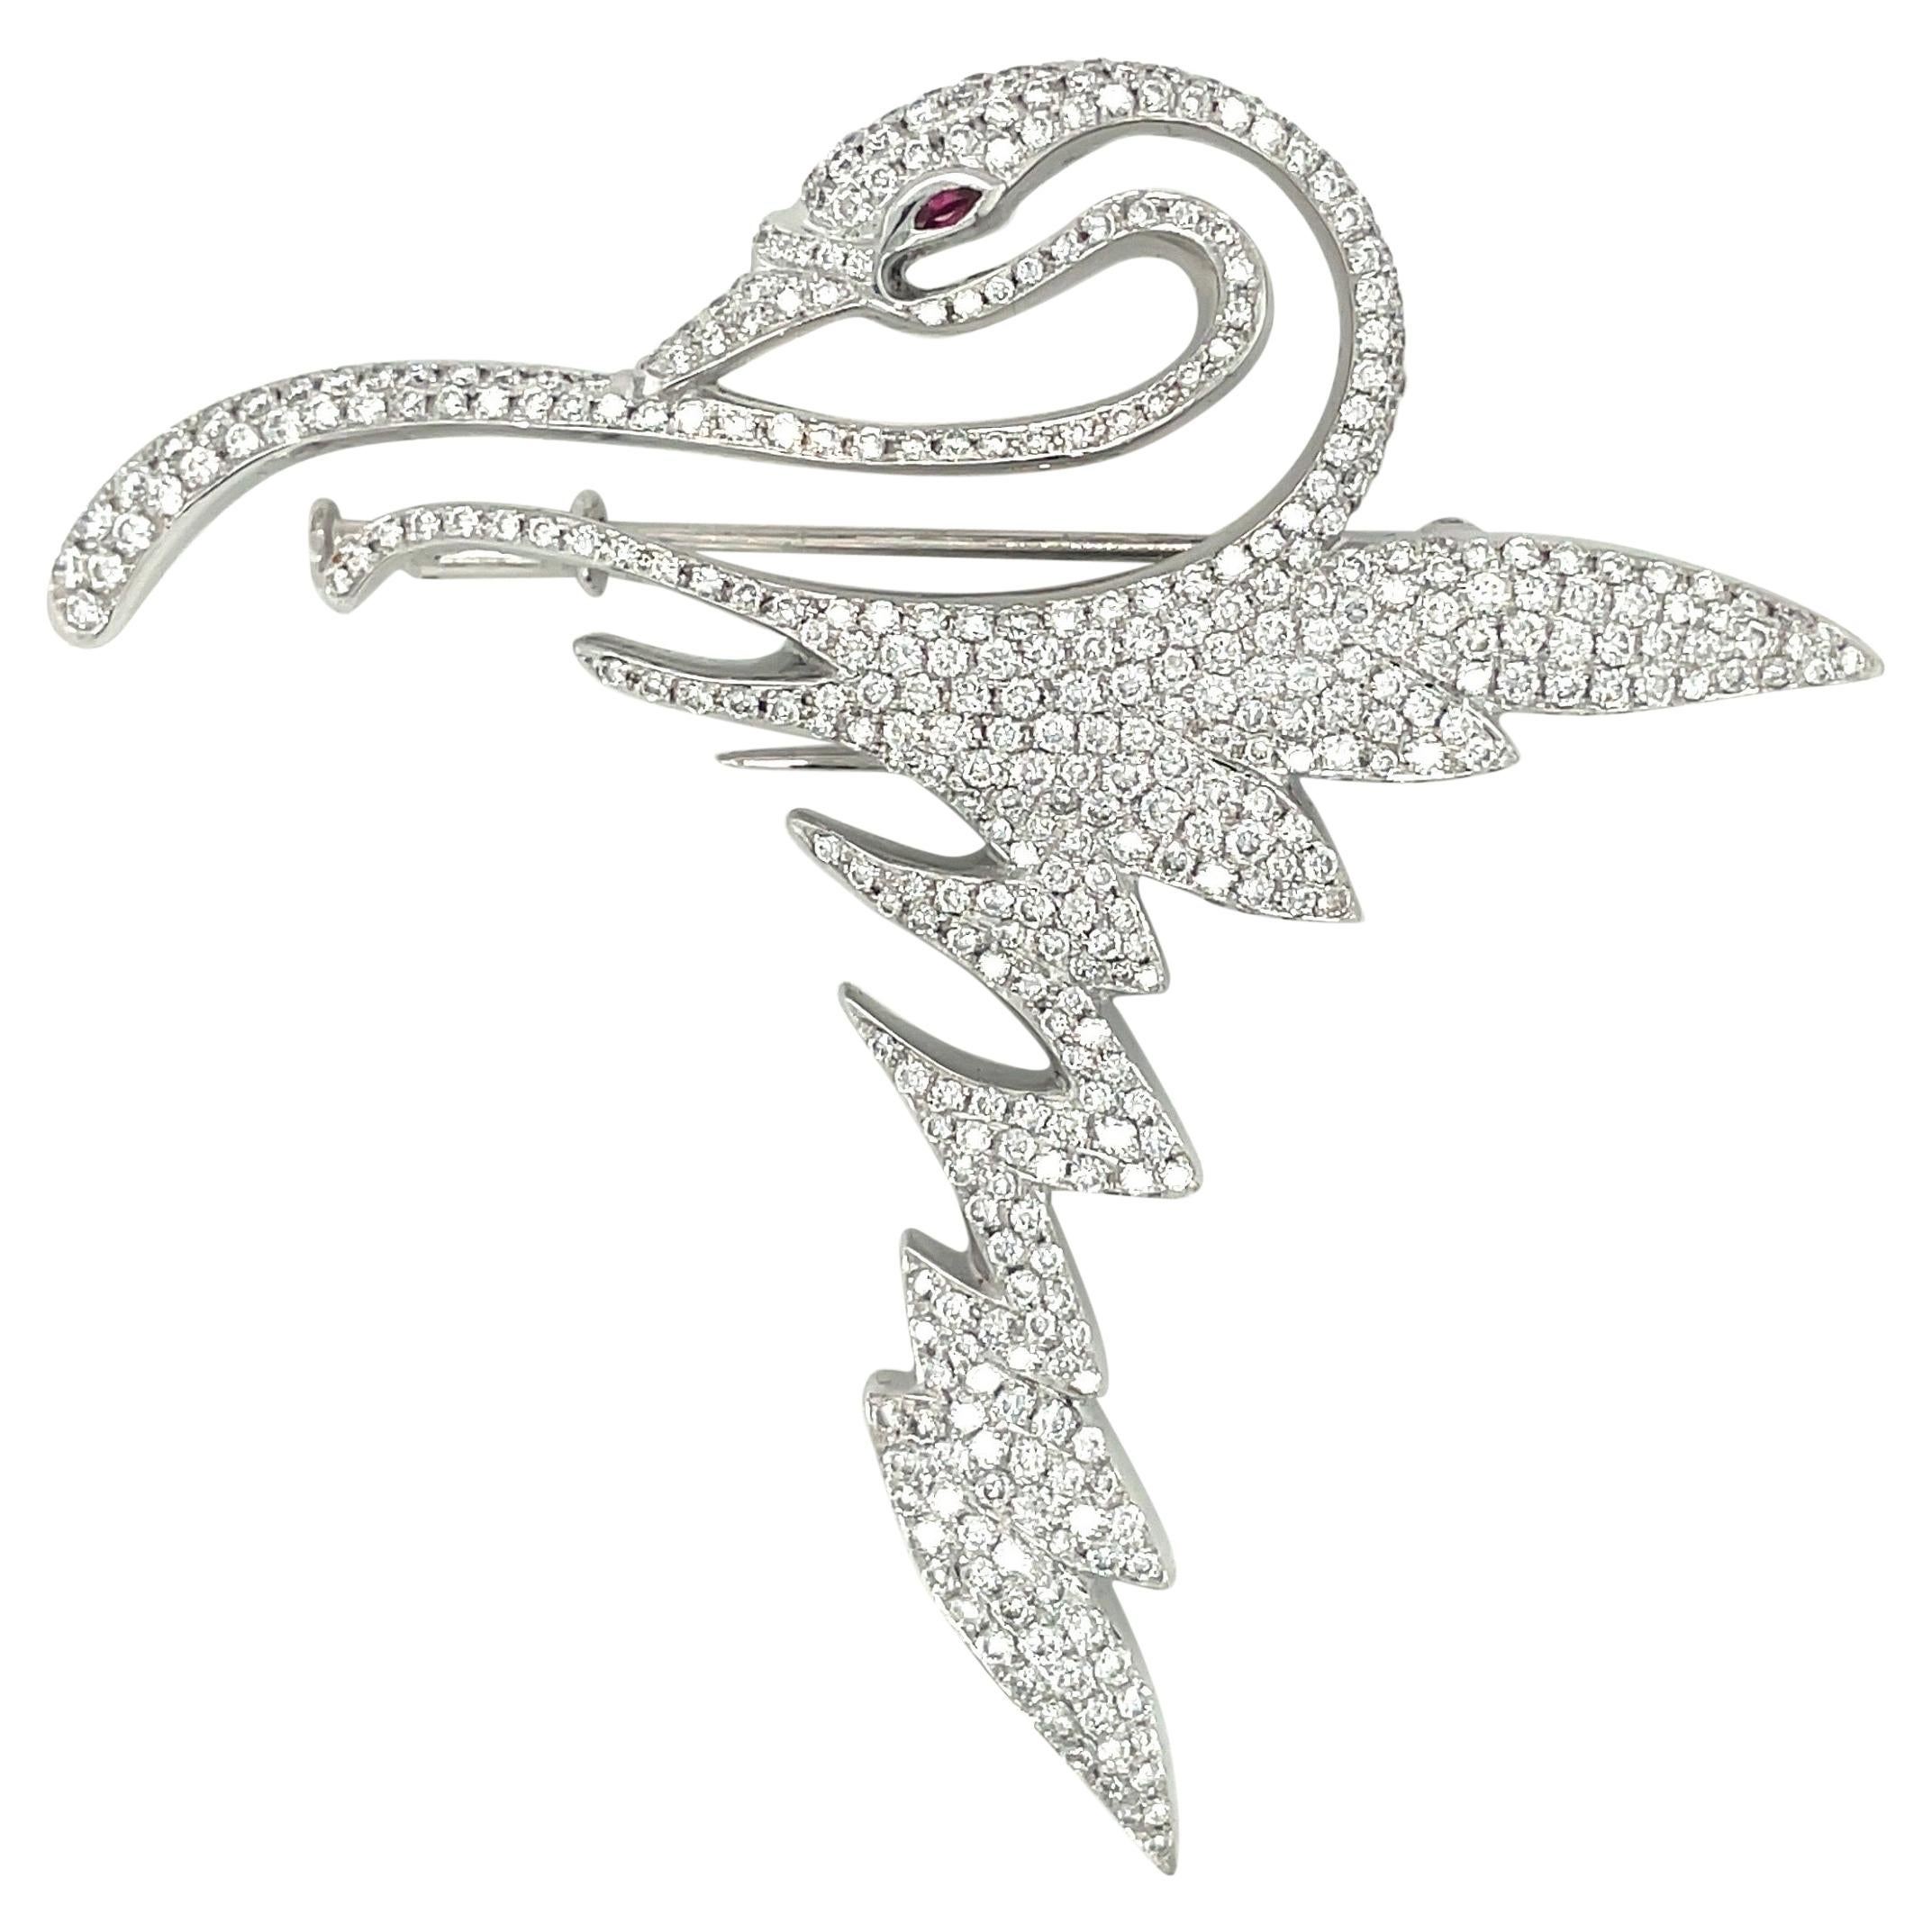 Cellini Jewelers 18kt White Gold 4.30Ct. Diamond Swan Brooch For Sale